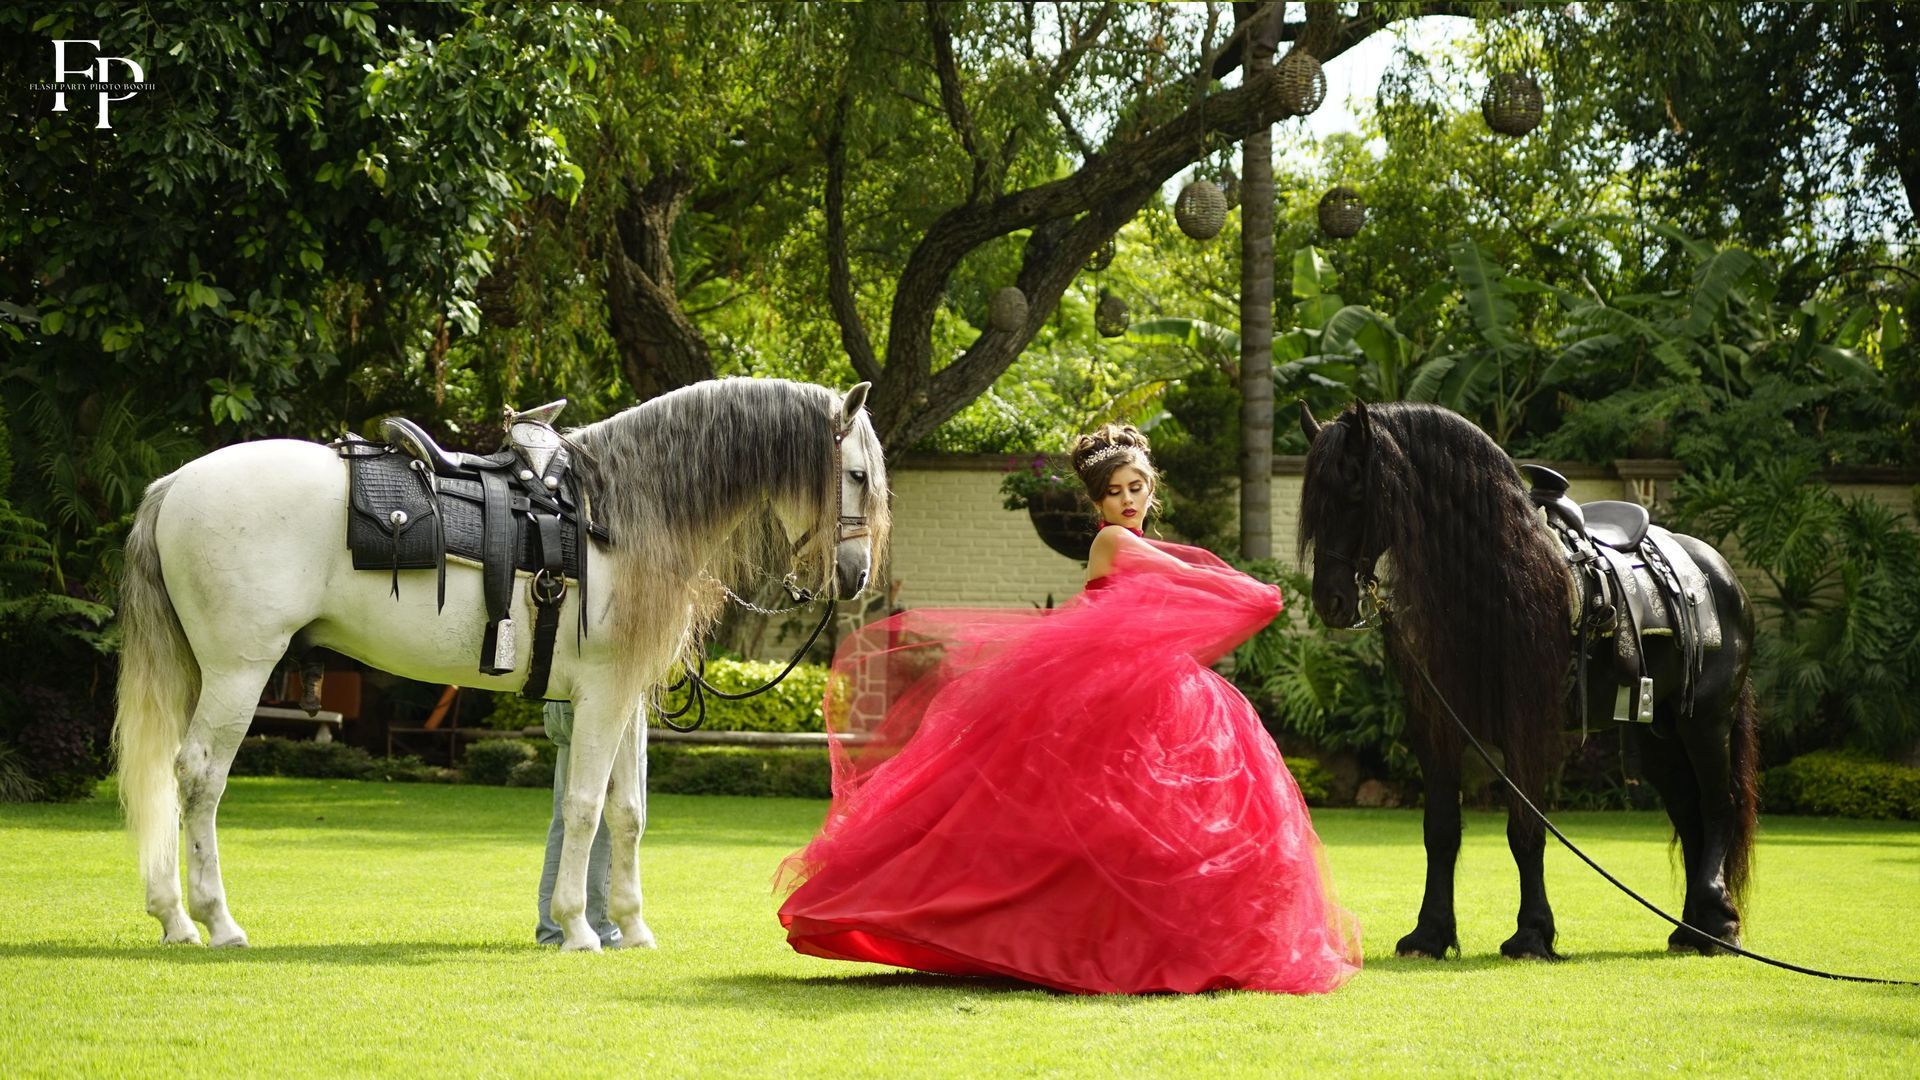 Quinceañera celebrates with a dance with two majestic horses in the background.